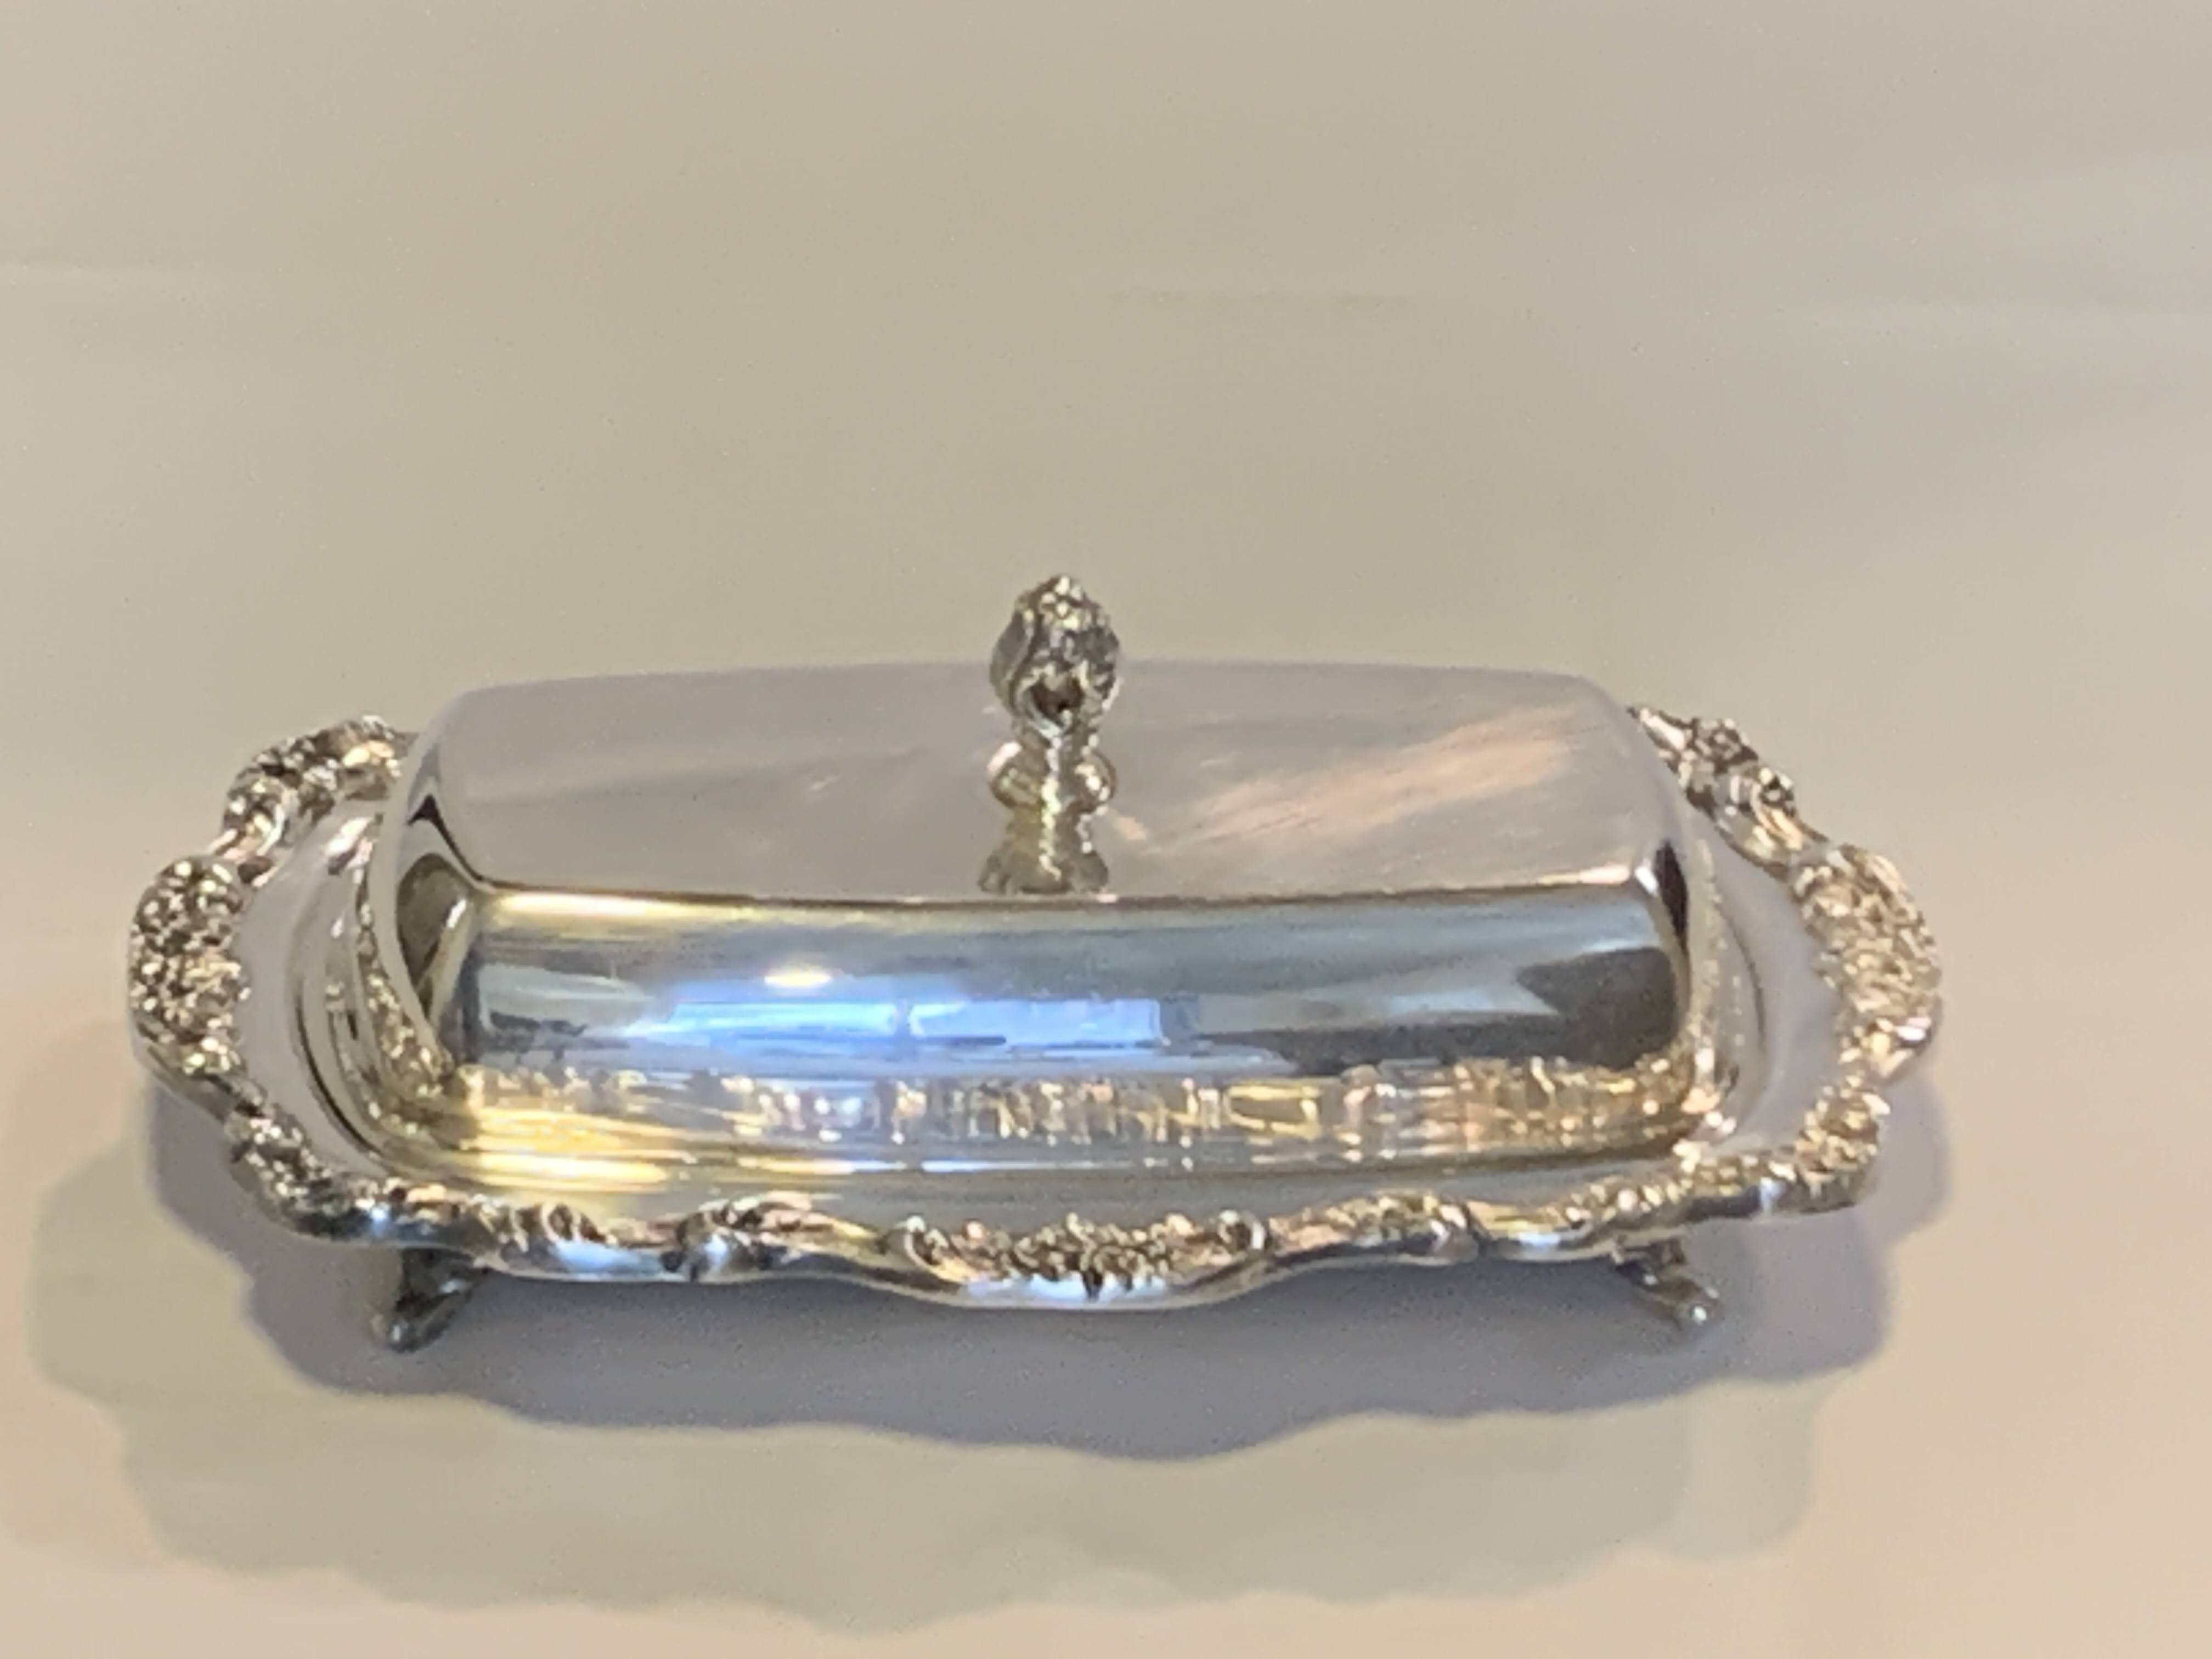 Silver Plated Mid Century Butter Dish - Ornate Rim